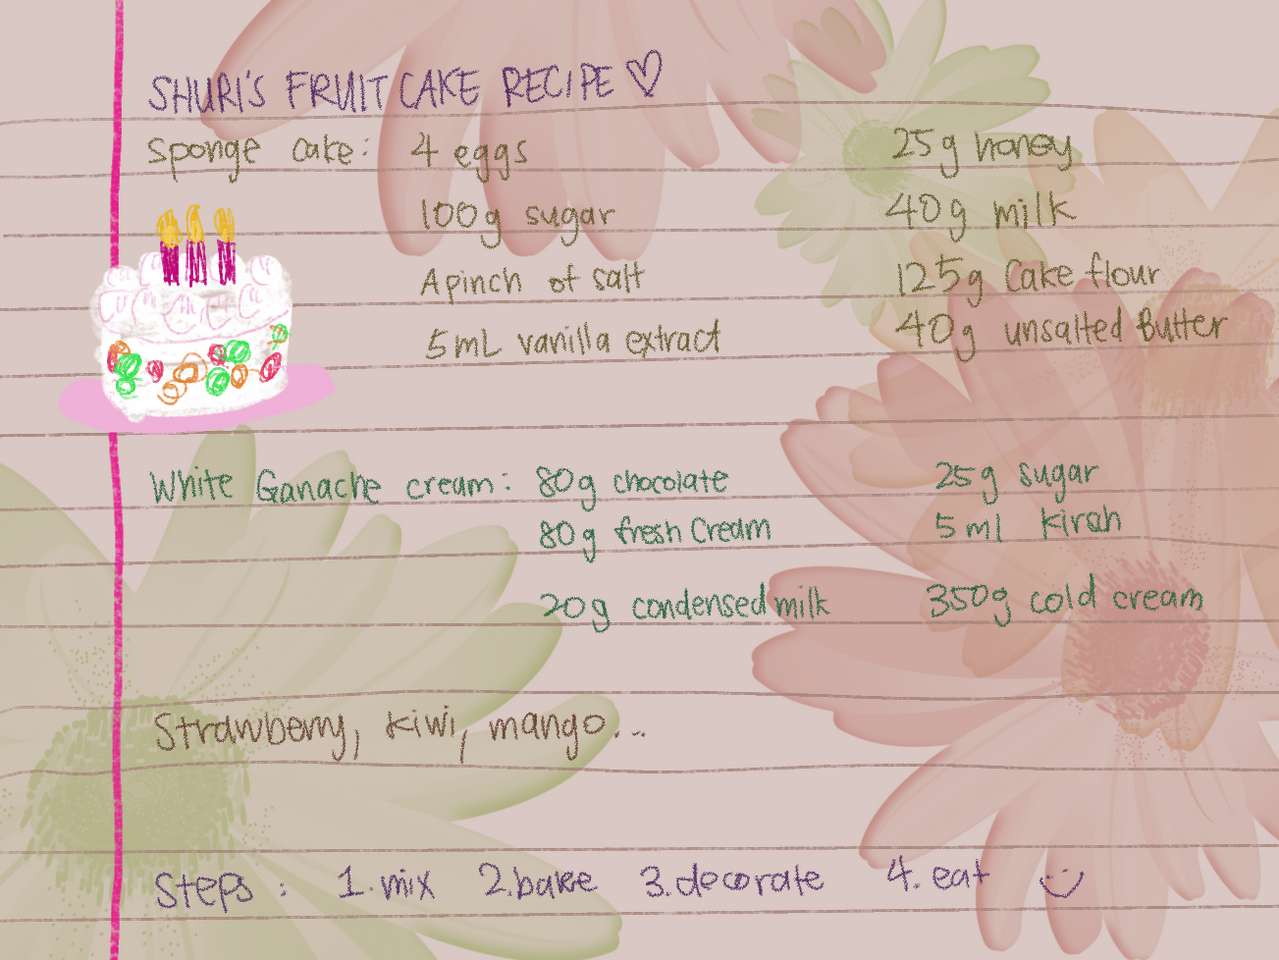 Shuri's Fruit Cake Recipe puzzle online from photo